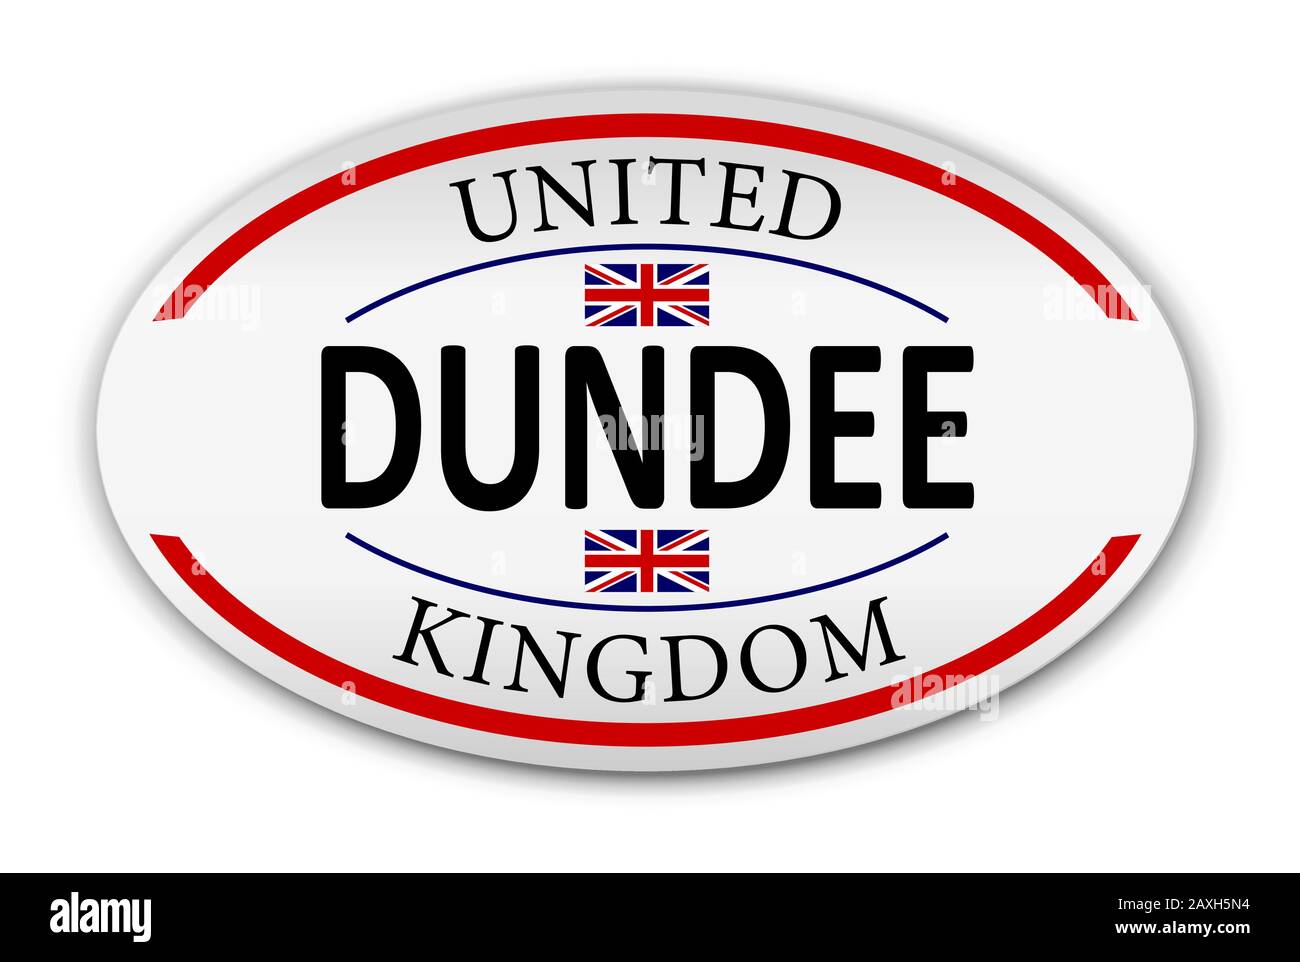 Dundee logo badge UK over a white background Stock Vector